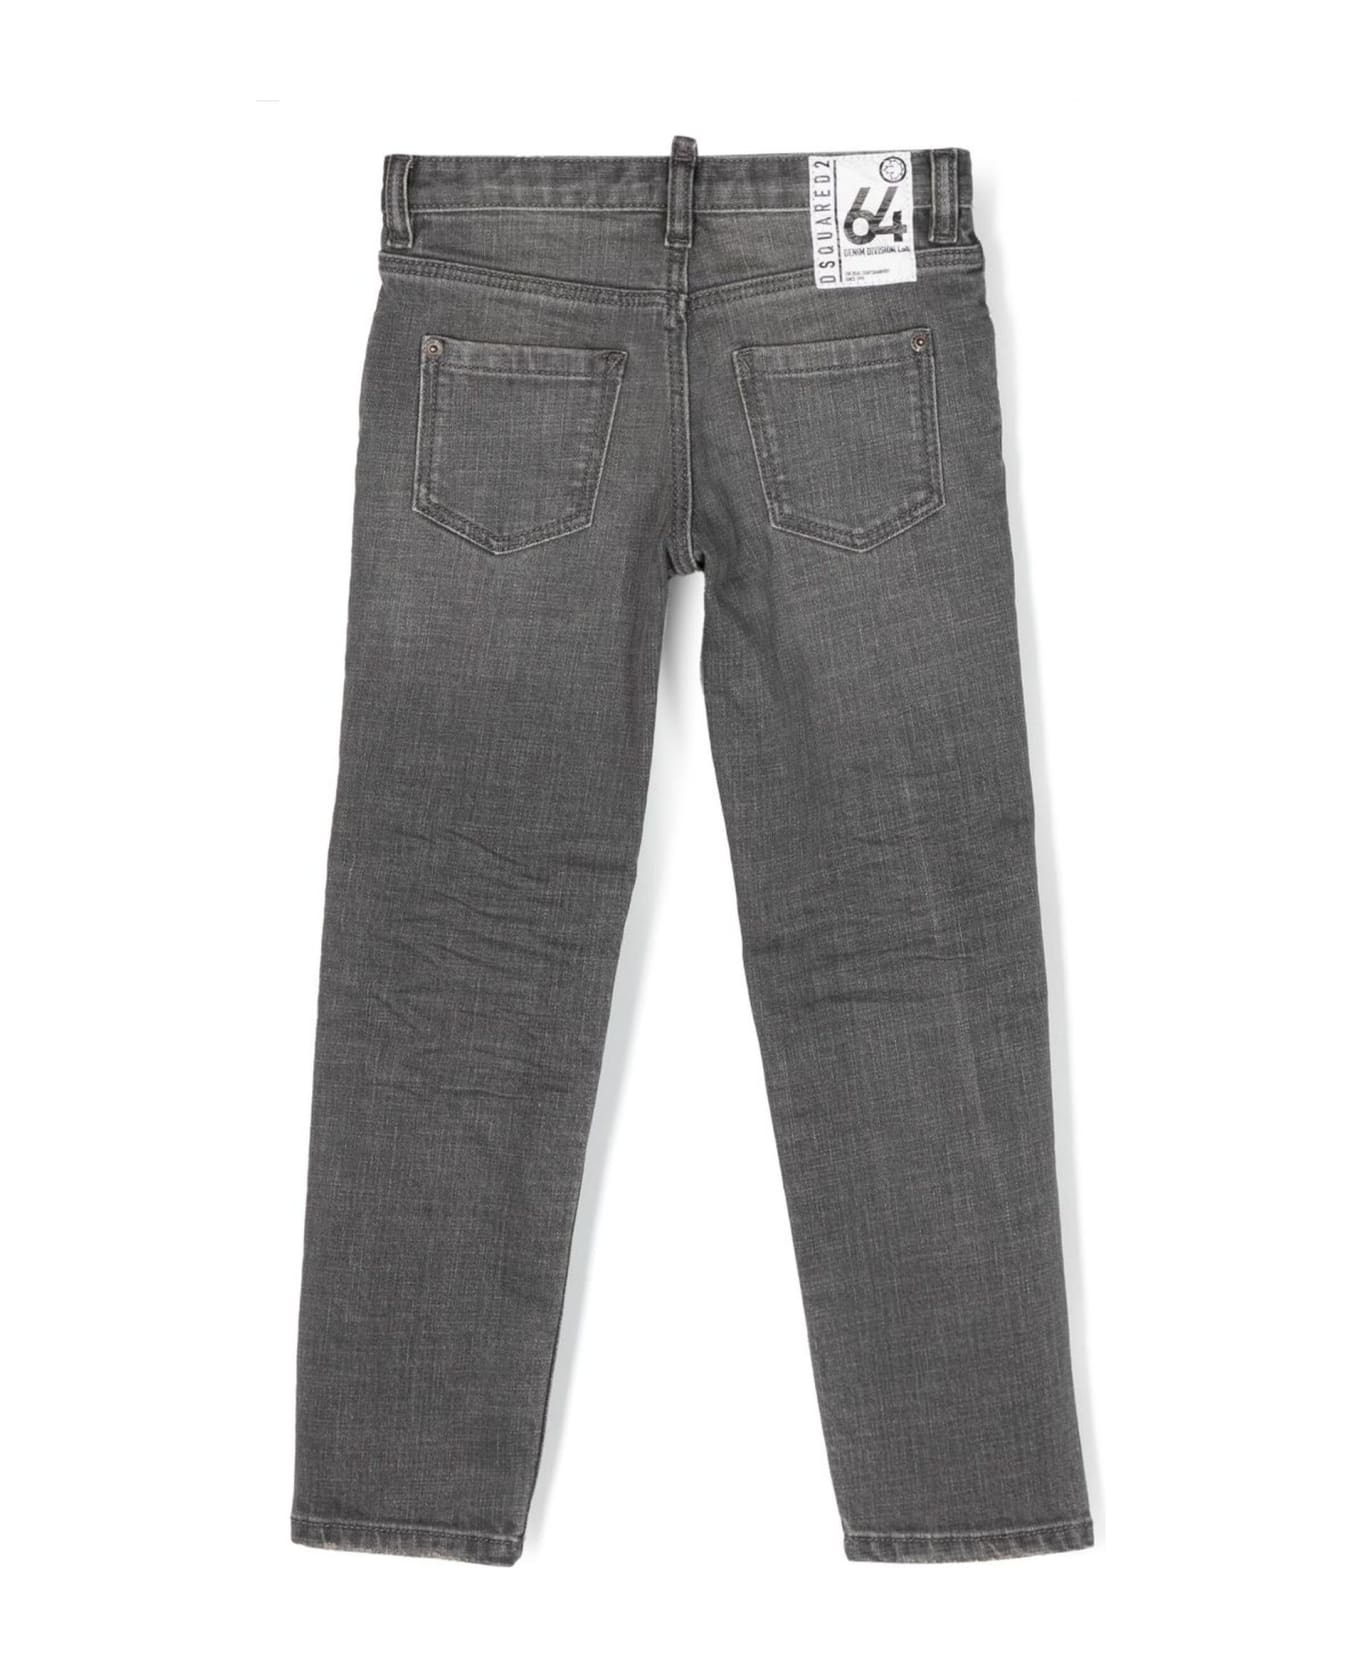 Dsquared2 Jeans Grey - Grey